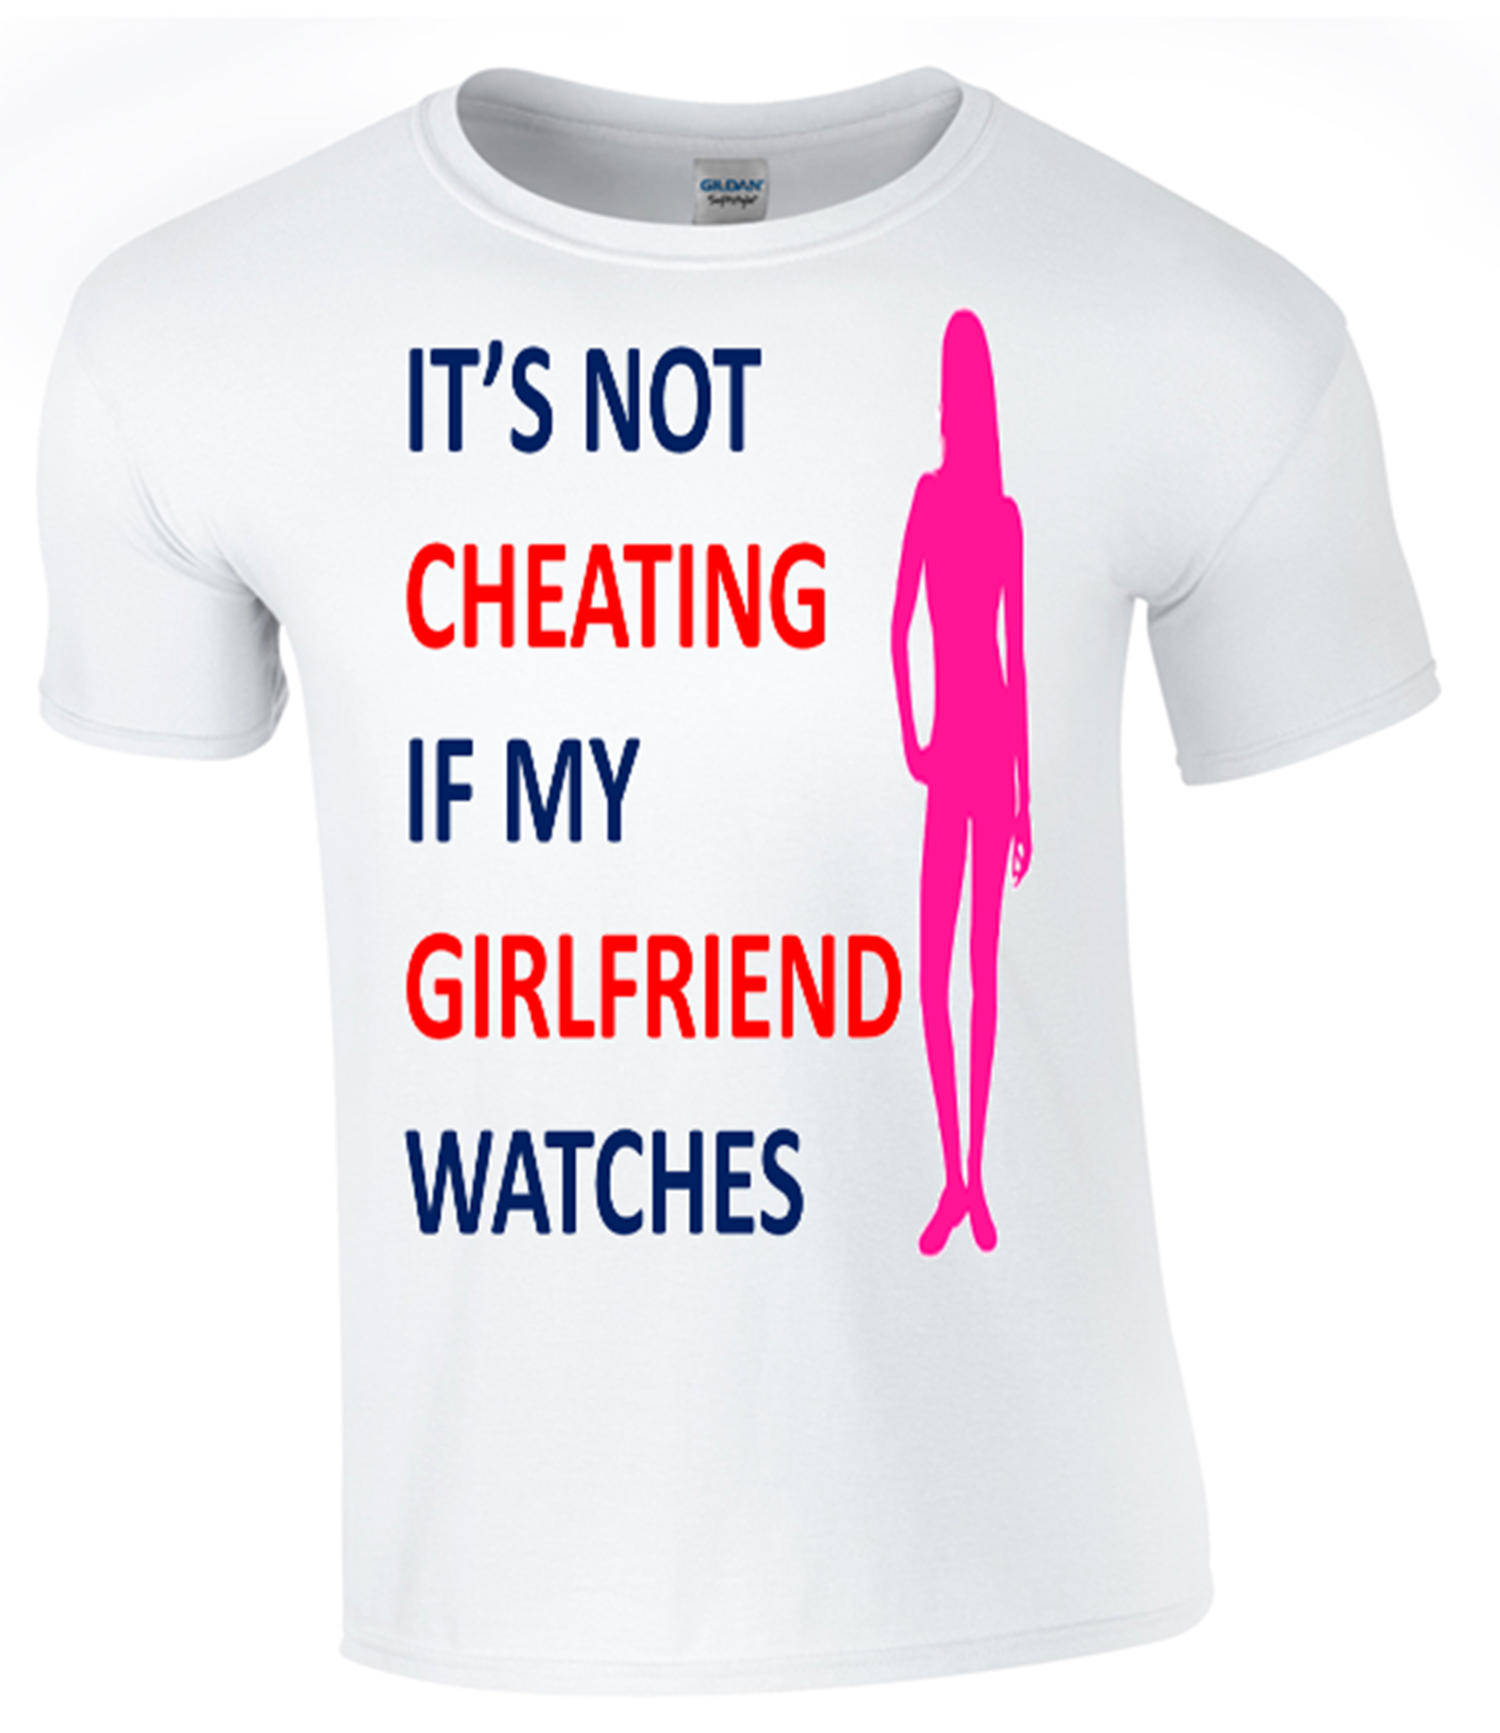 IT’S NOT CHEATING IF MY ??????? WATCHES - Army 1157 kit S / GIRLFRIEND Army 1157 Kit Veterans Owned Business